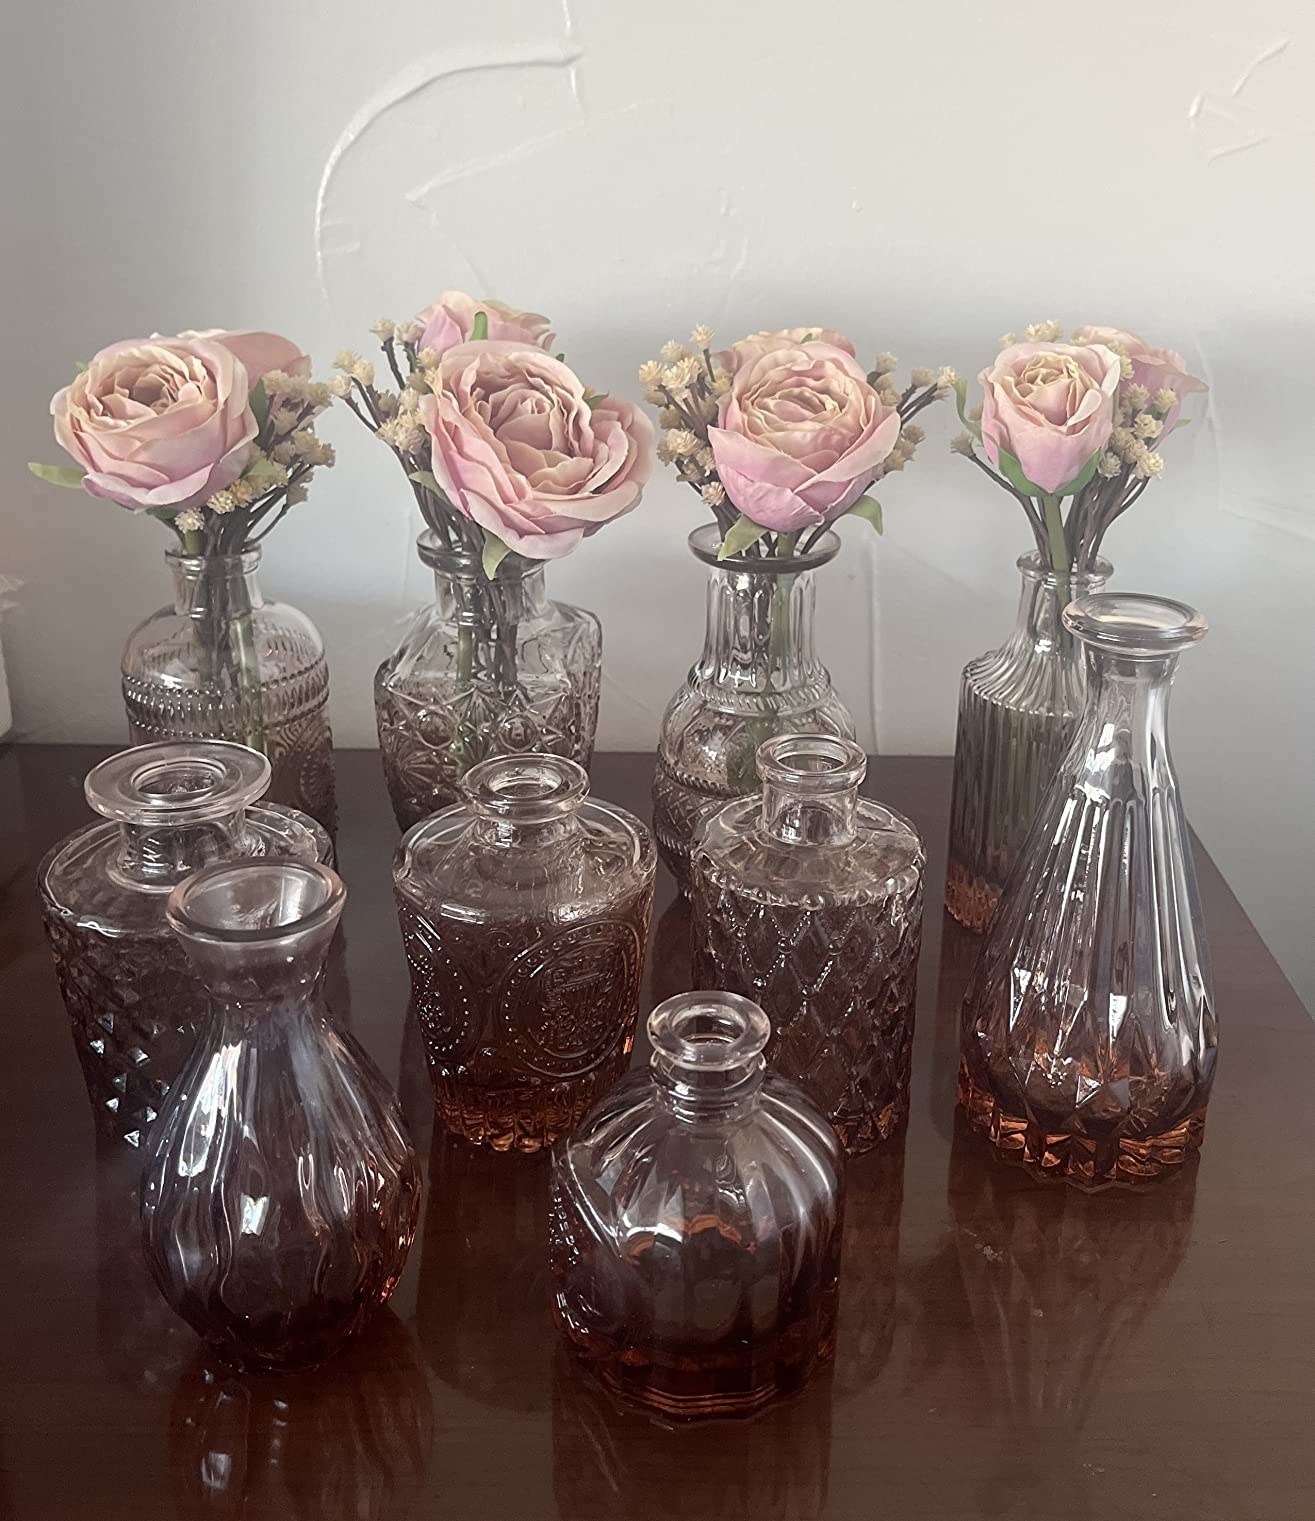 A reviewer&#x27;s photo of the pink vases with roses in them